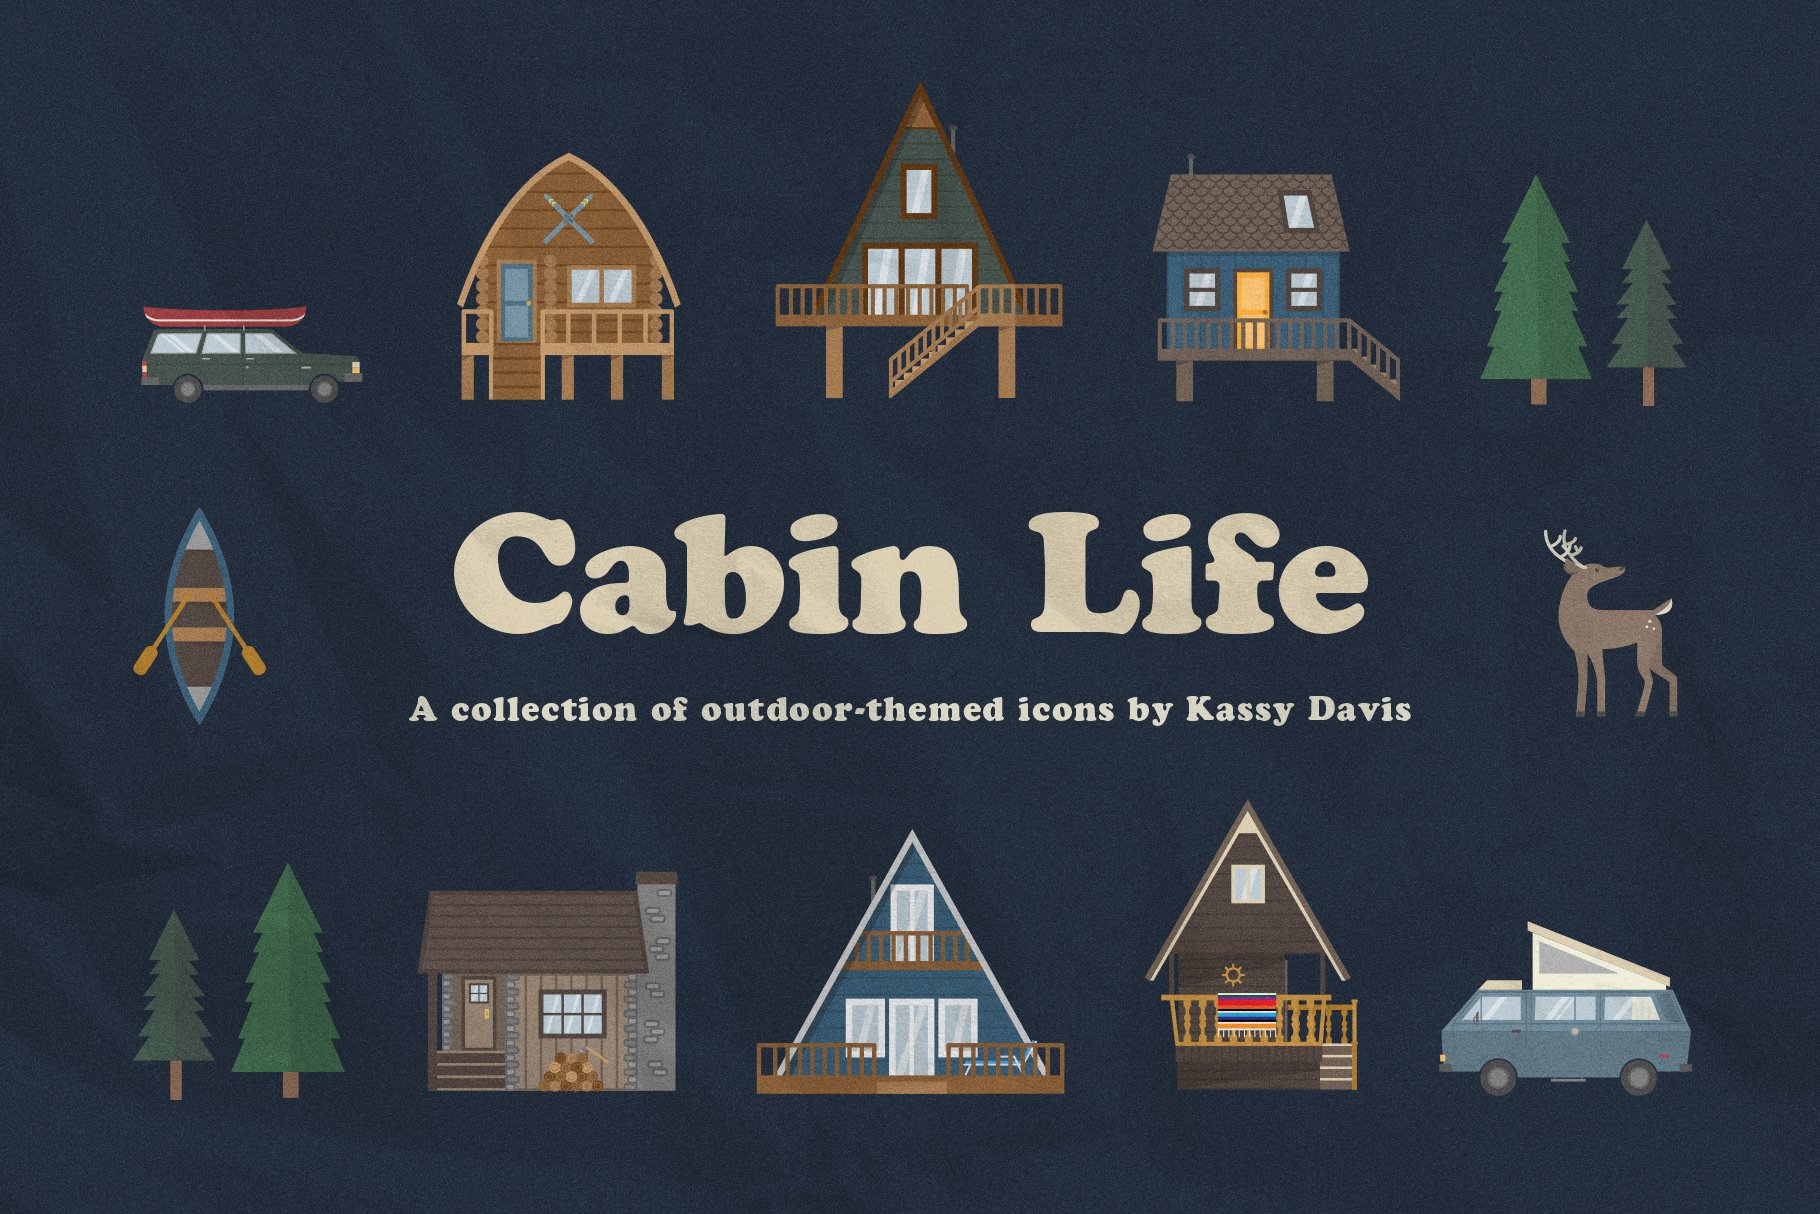 Cabin Life Icon Collection cover image.